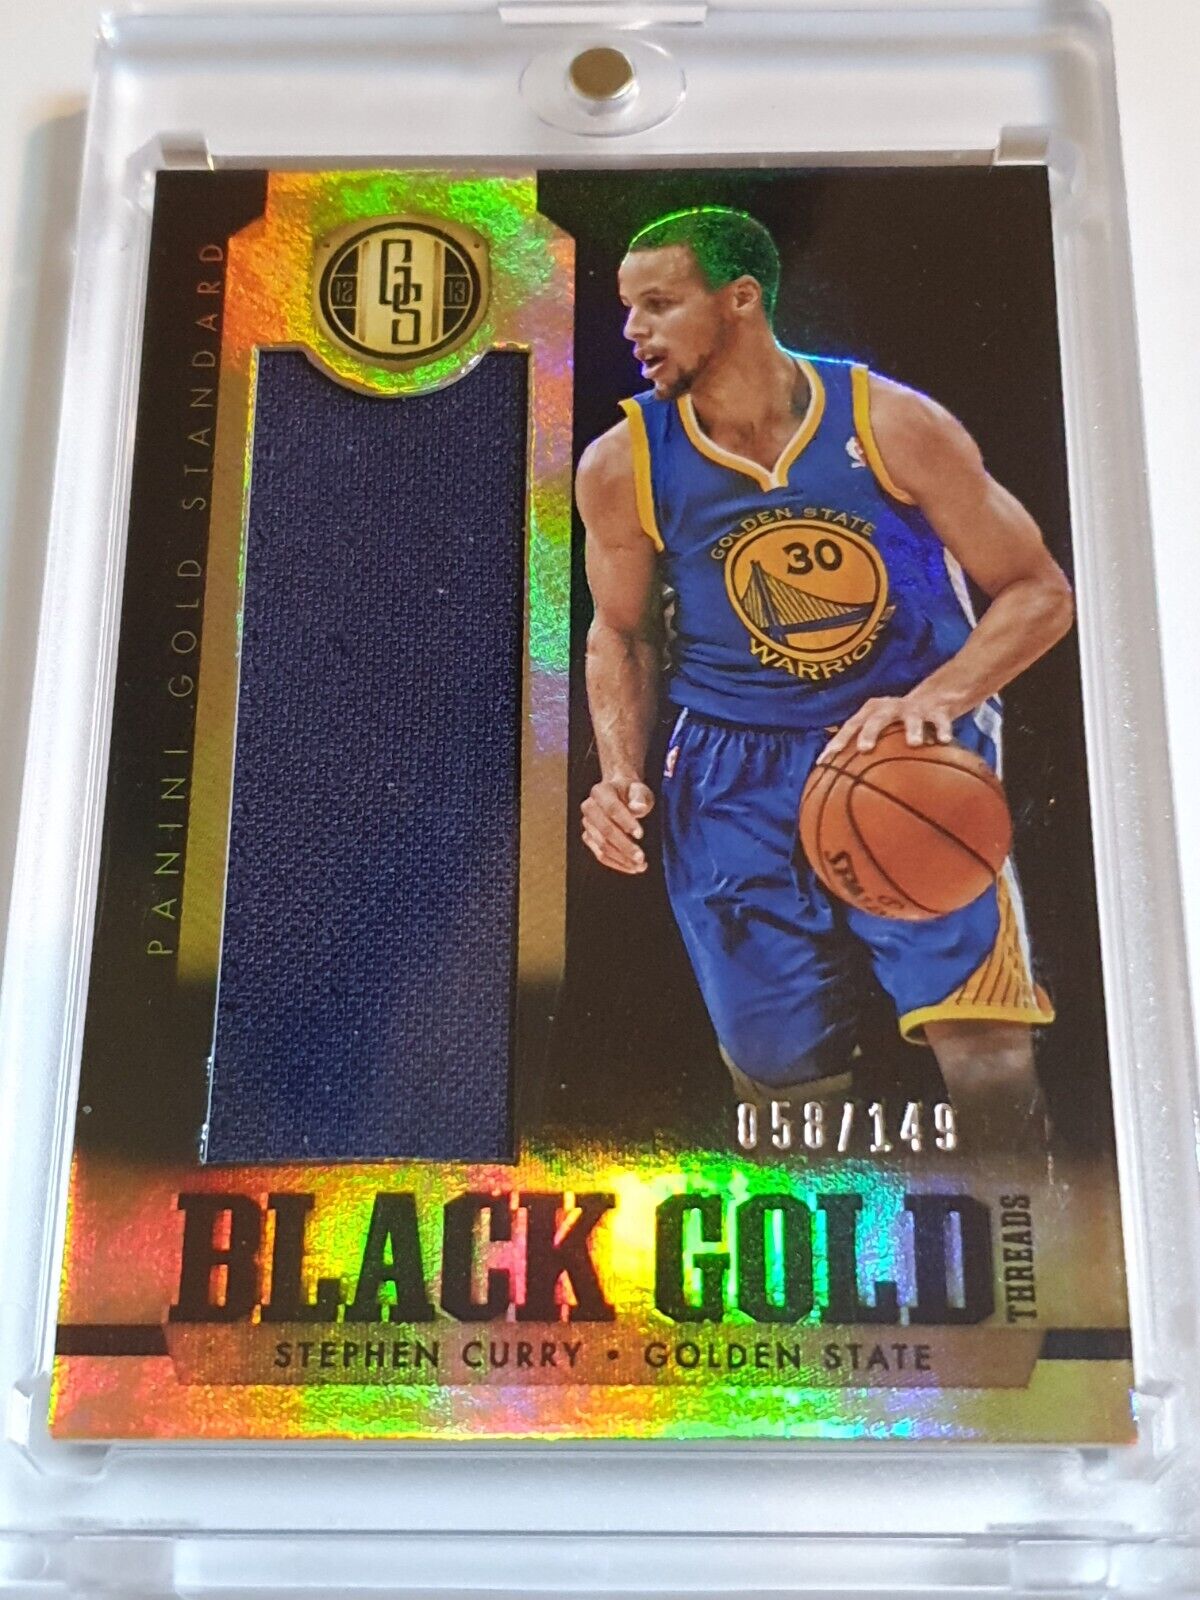 2012 Panini Gold Standard Stephen Curry #PATCH /149 Game